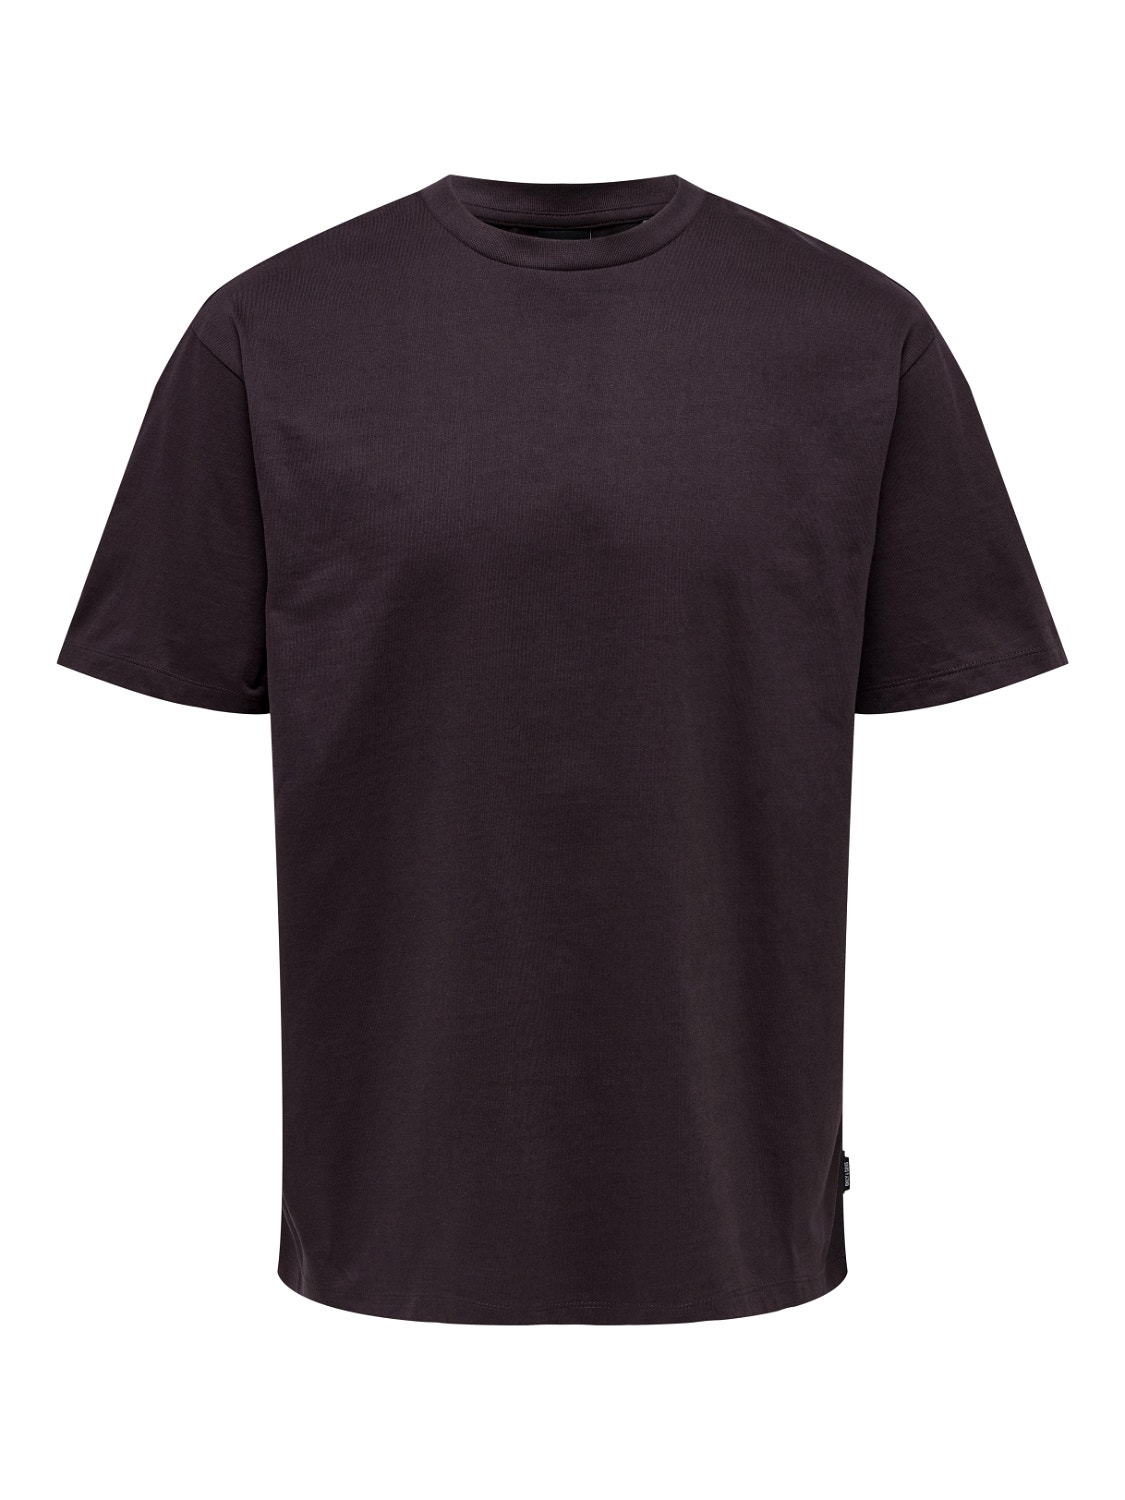 ONLY & SONS Relaxed Fit Round Neck T-Shirt -Fudge - 22022532